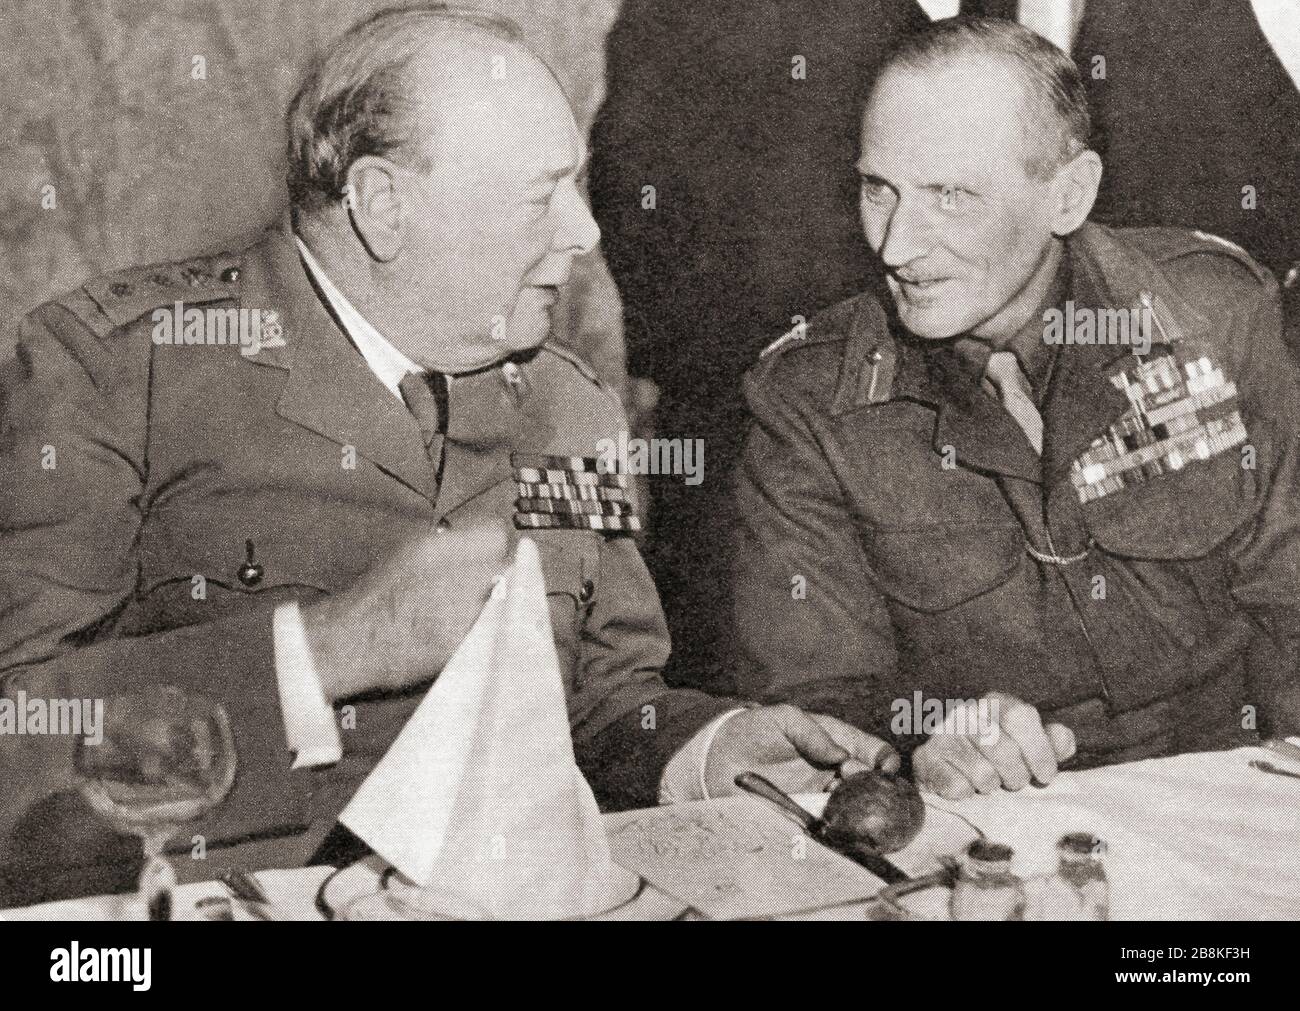 Winston churchill and Field Marshal Montgomery at the First Alamein Dinner, 1945. Sir Winston Leonard Spencer-Churchill, 1874 – 1965. British politician, army officer, writer and twice Prime Minister of the United Kingdom.  Field Marshal Bernard Law Montgomery, 1st Viscount Montgomery of Alamein, 1887 – 1976, nicknamed Monty and The Spartan General.  Senior British Army officer Stock Photo